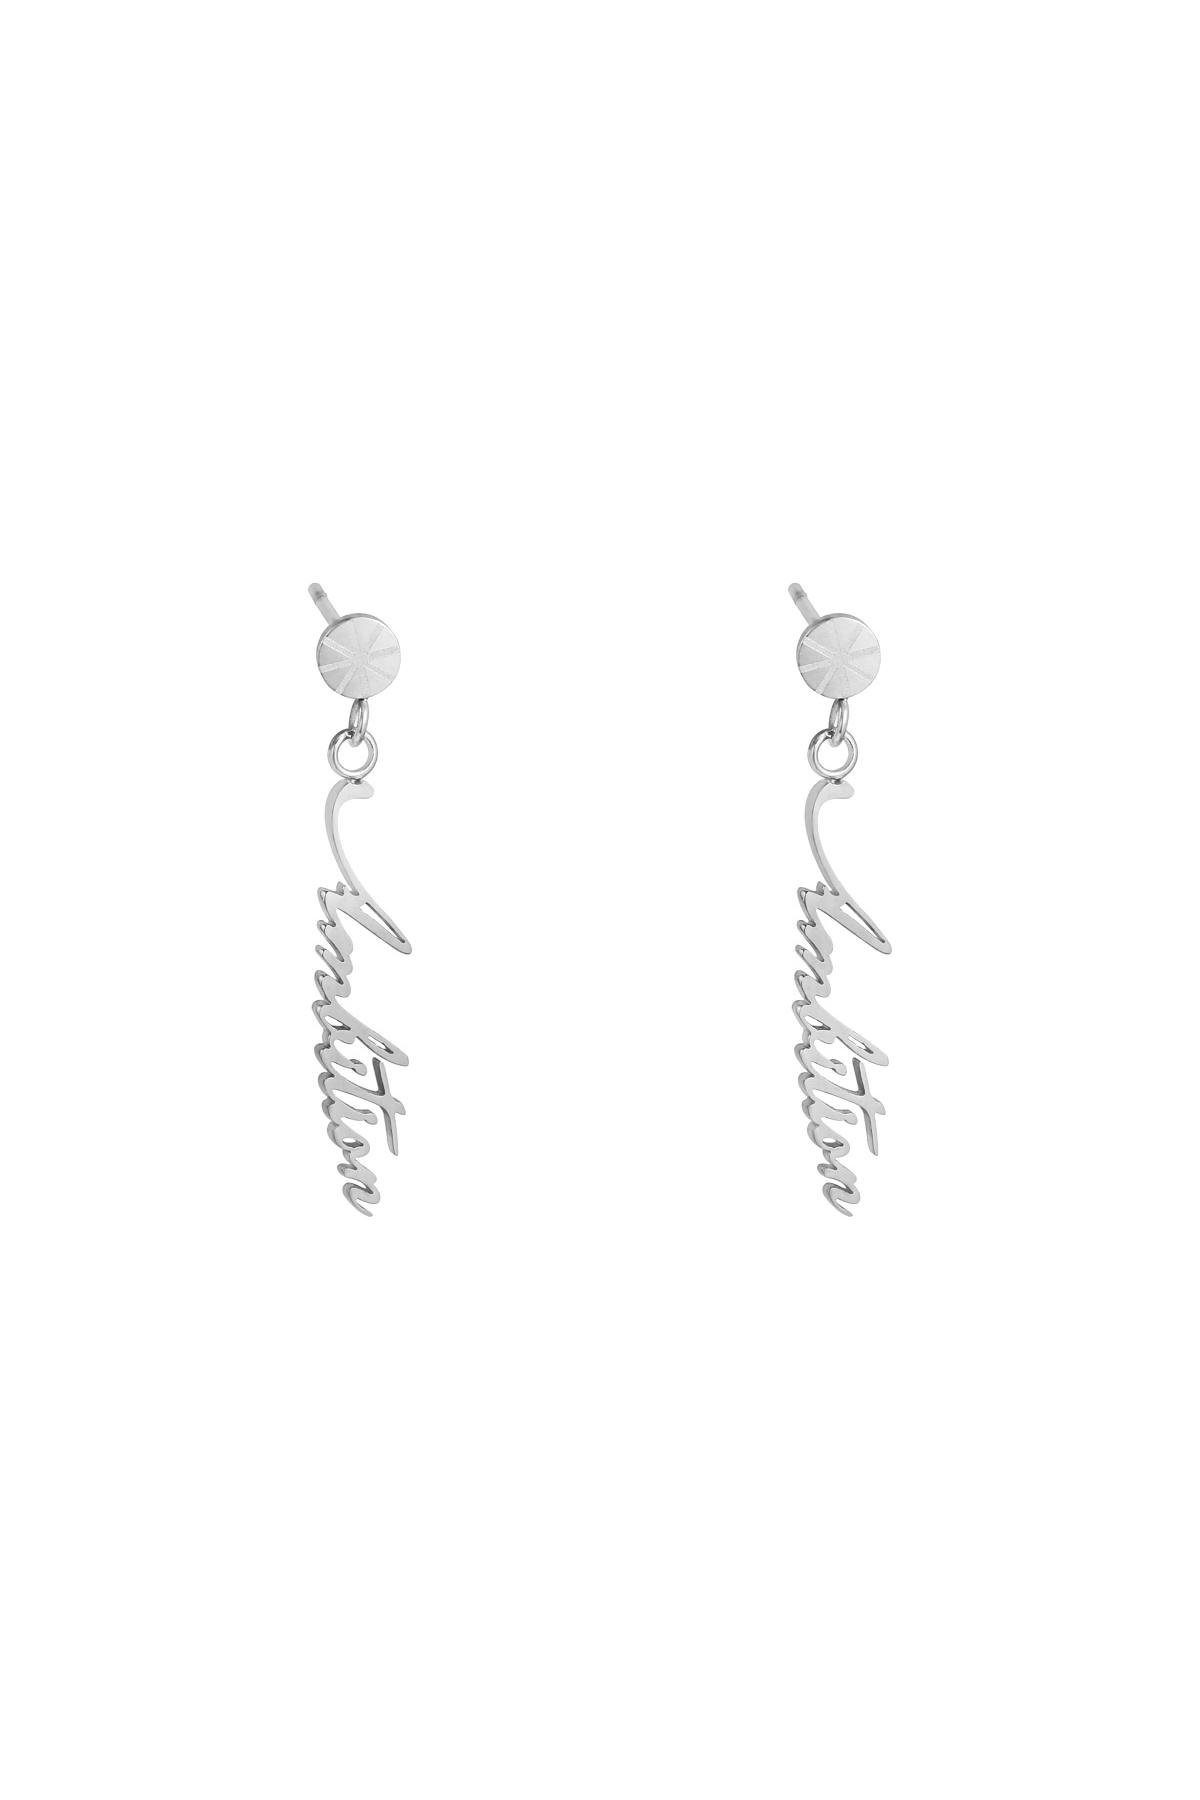 Earrings Ambition Silver Stainless Steel h5 